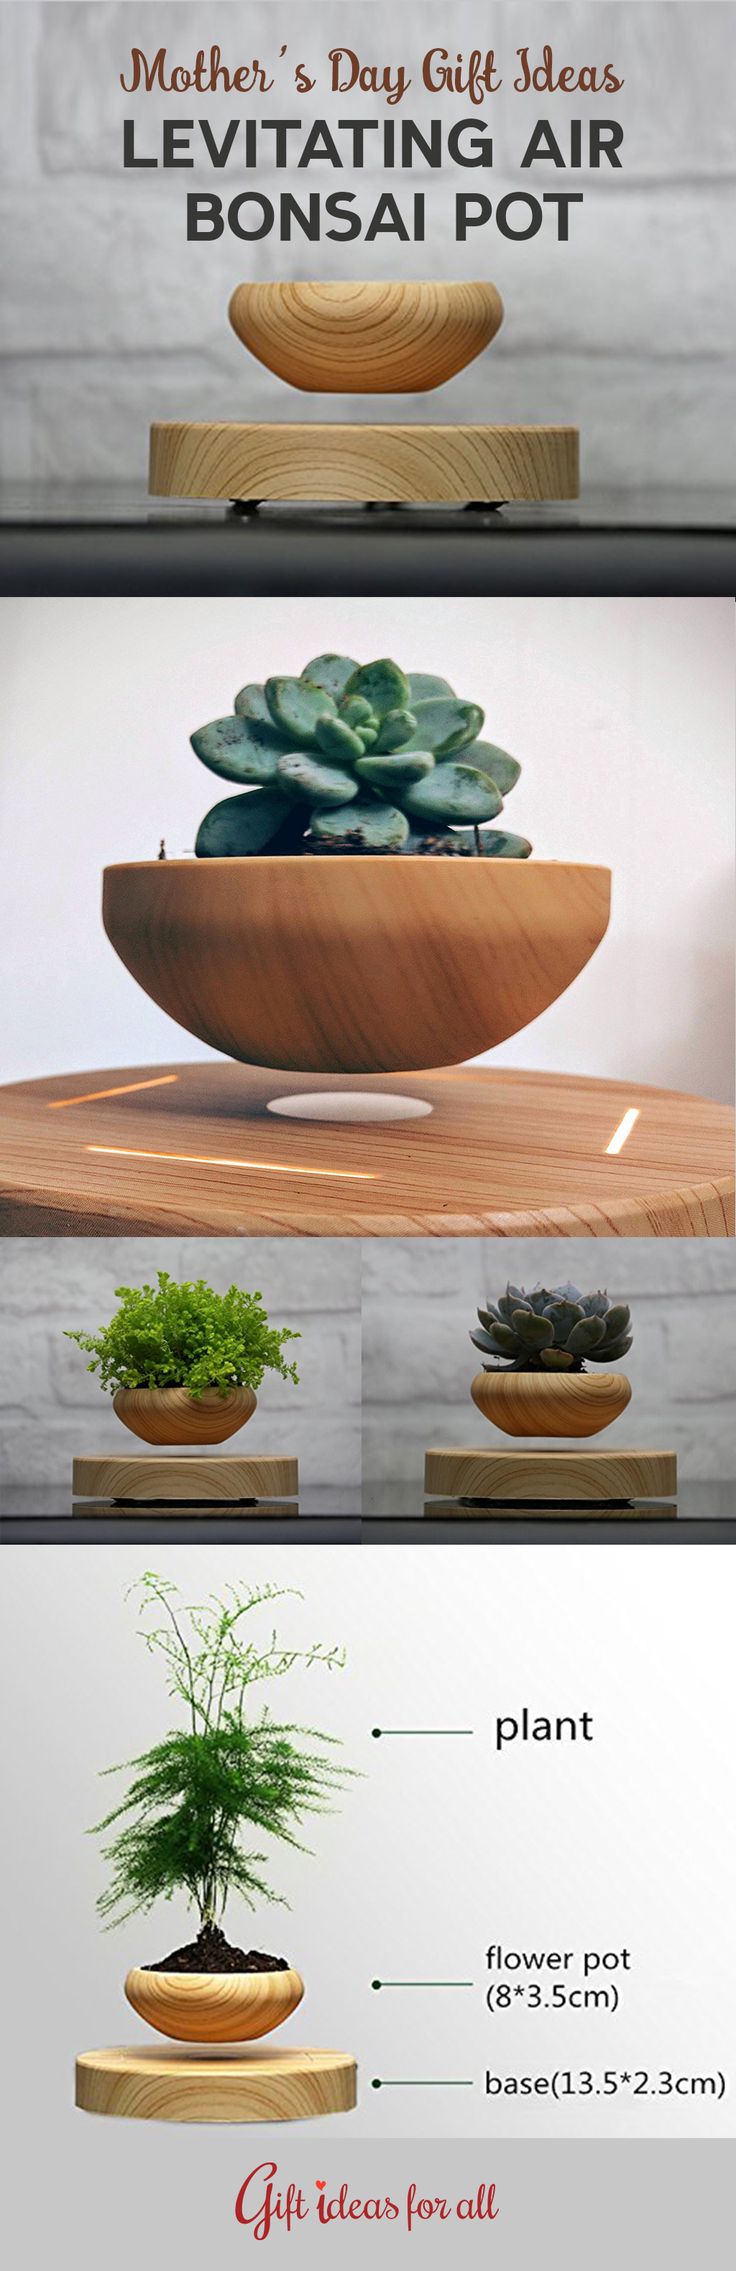 Really unique Levitating Air Bonsai Pot that holds a small plant in air. This co...